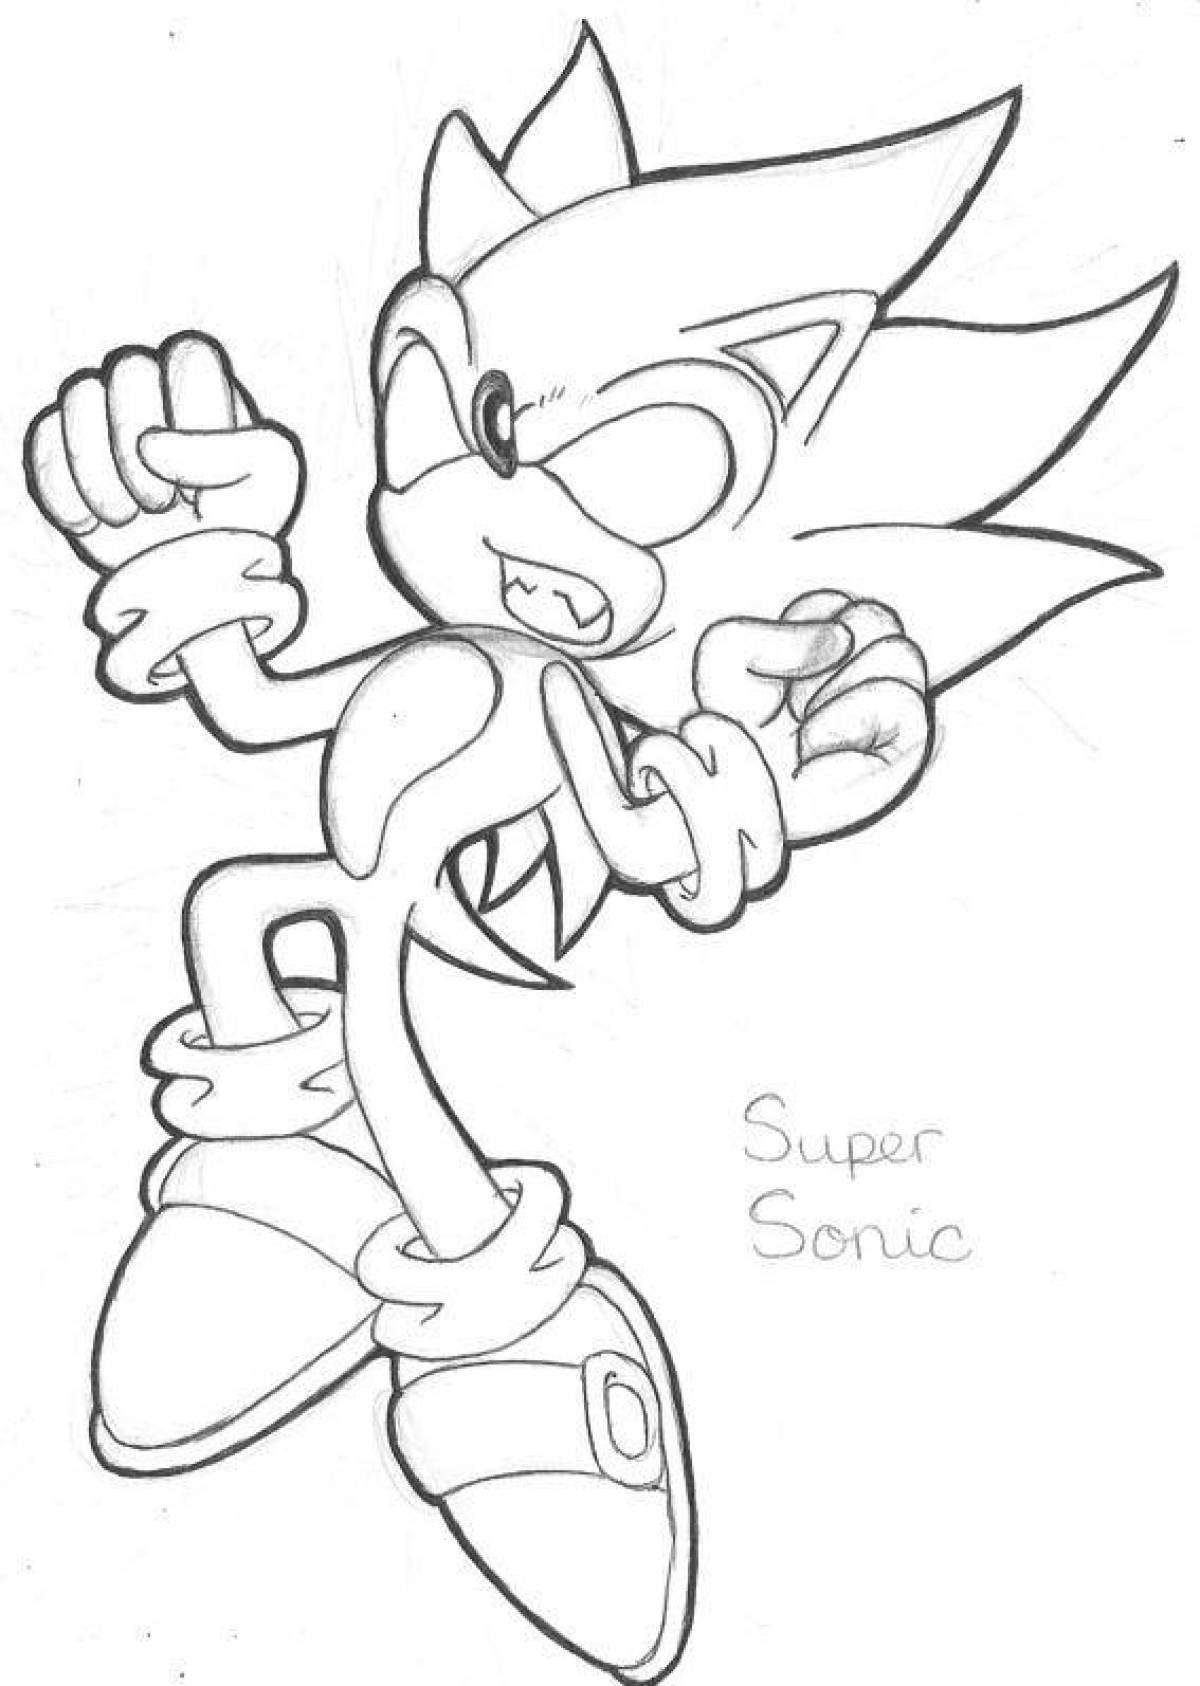 Amazing dark sonic coloring page